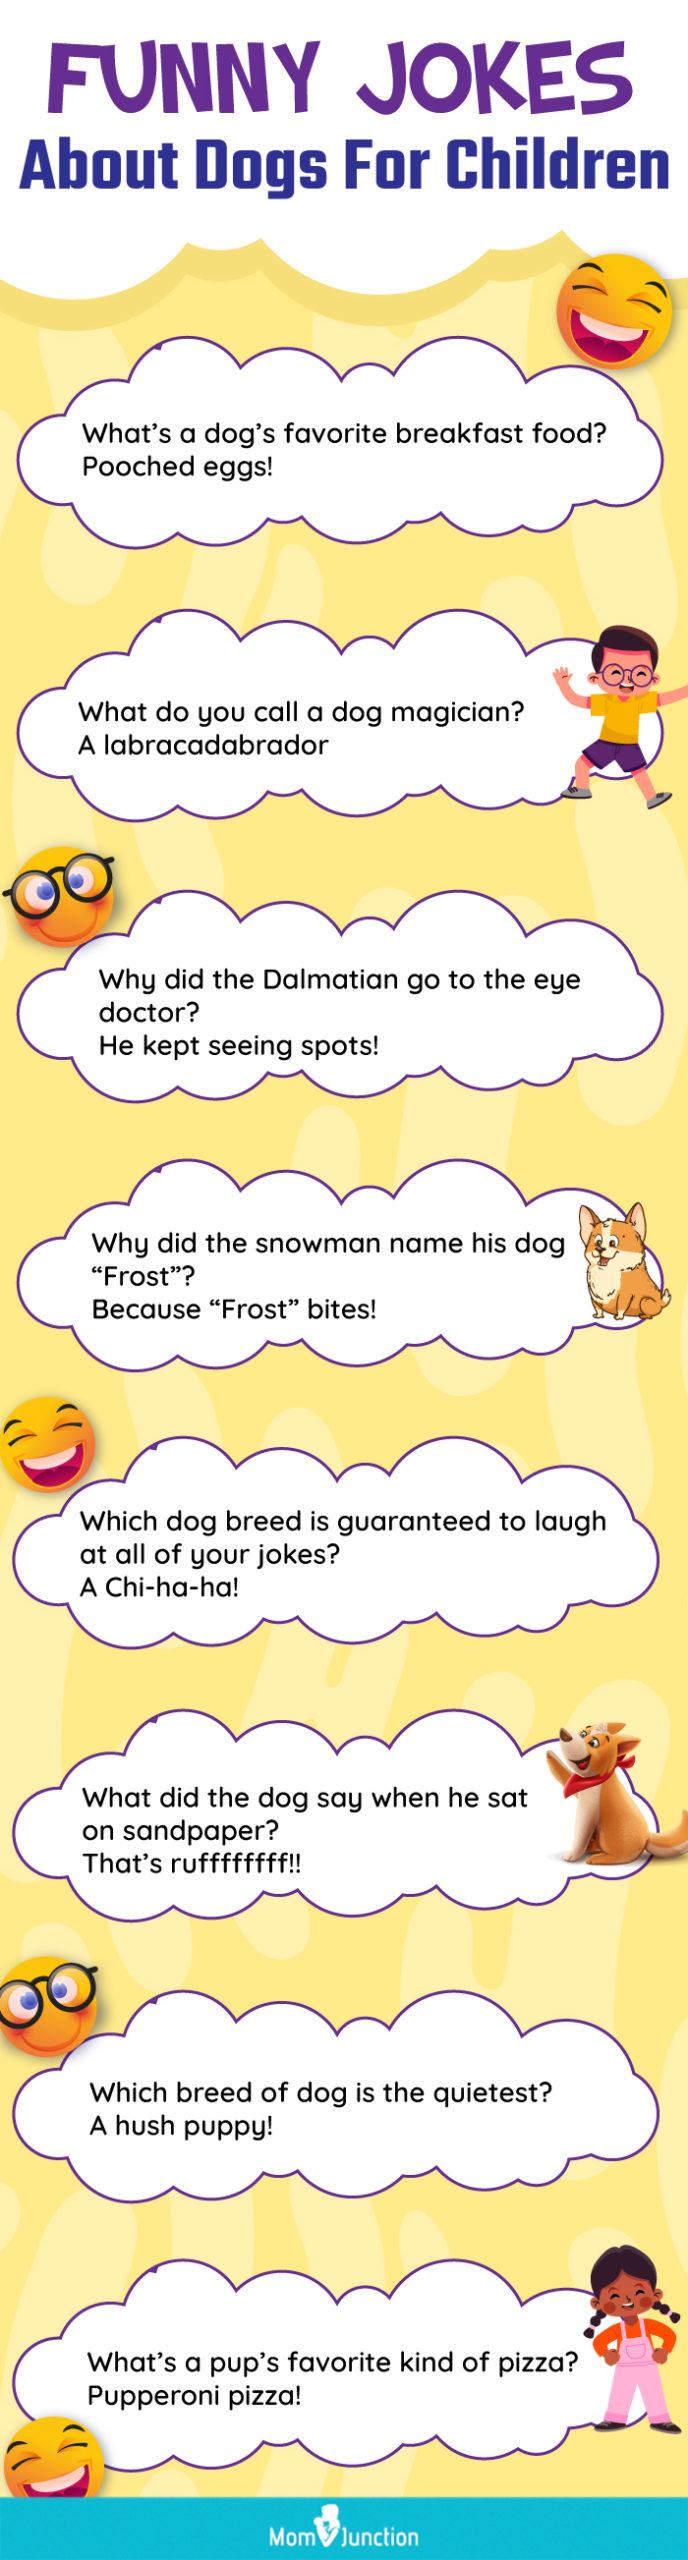 funny jokes about dogs for children(infographic)